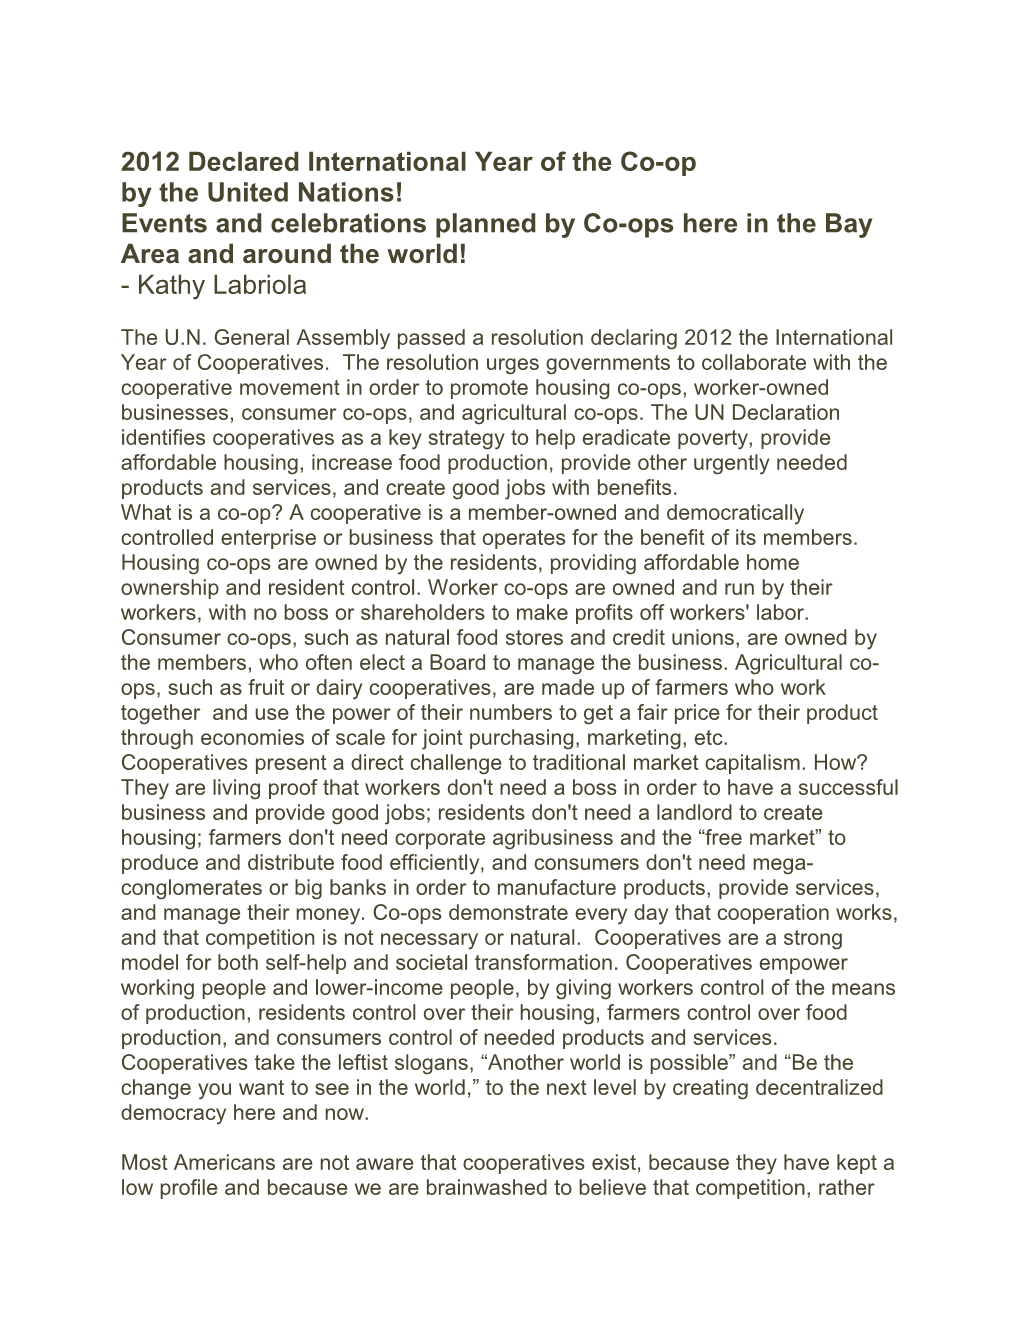 2012 Declared International Year of the Co-Op